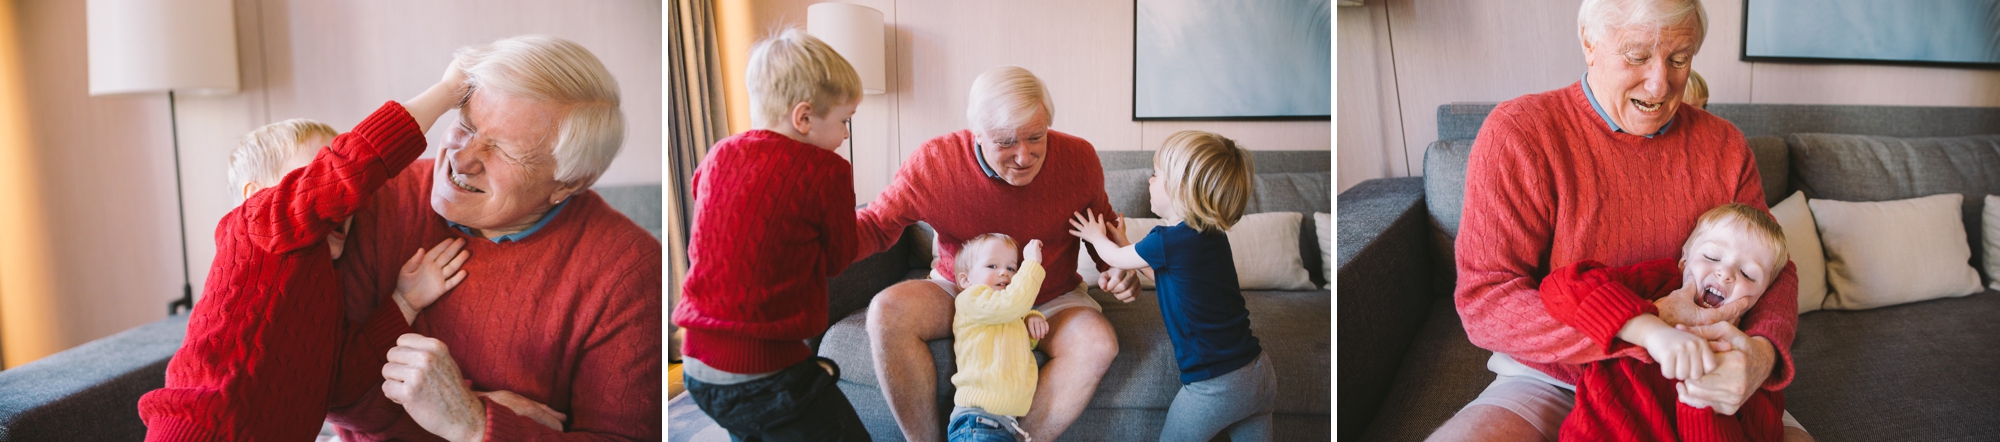 kids-playing-with-grandfather-photos.jpg